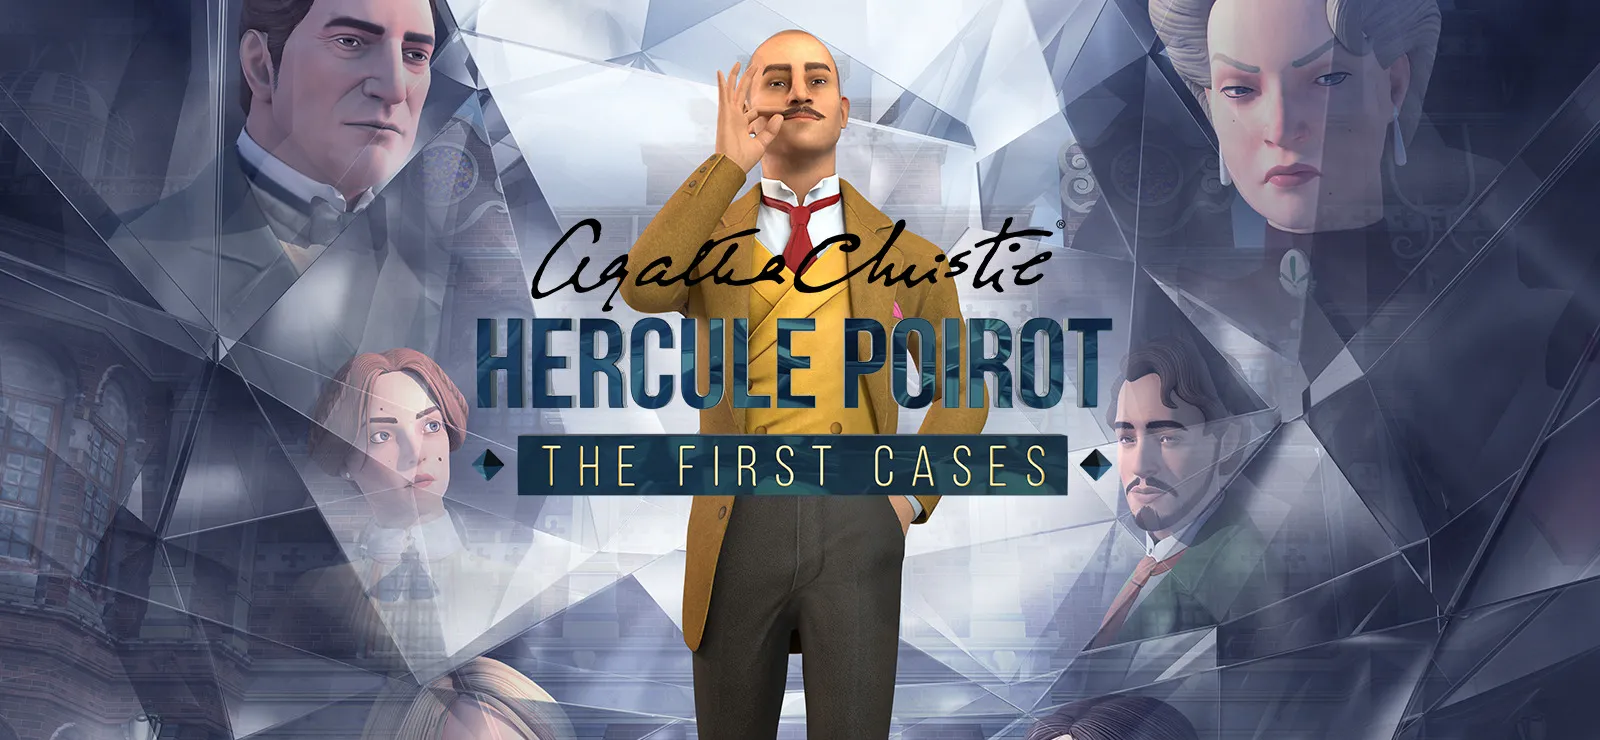 Hercule Poirot The First Cases review